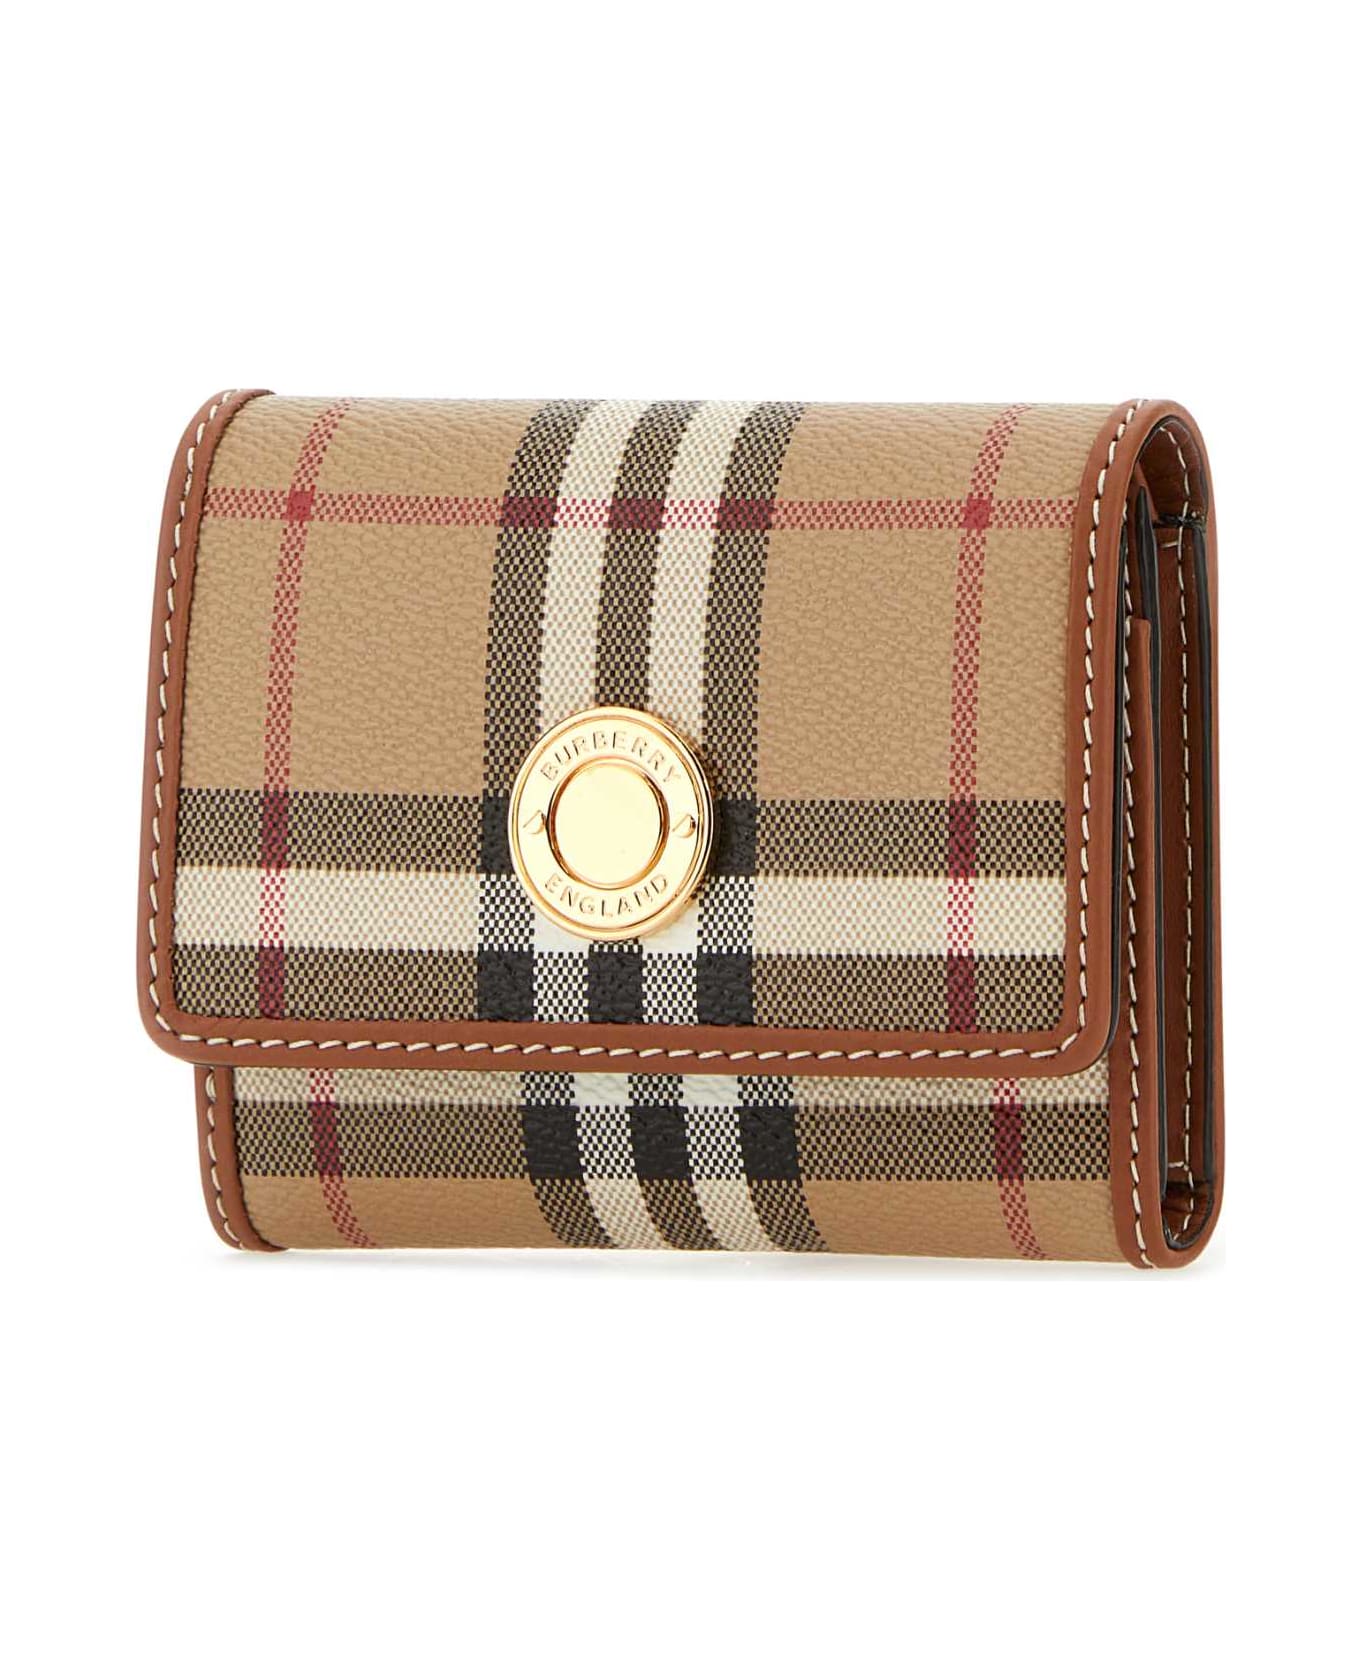 Burberry Printed Canvas And Leather Small Wallet - ARCHIVEBEIGE